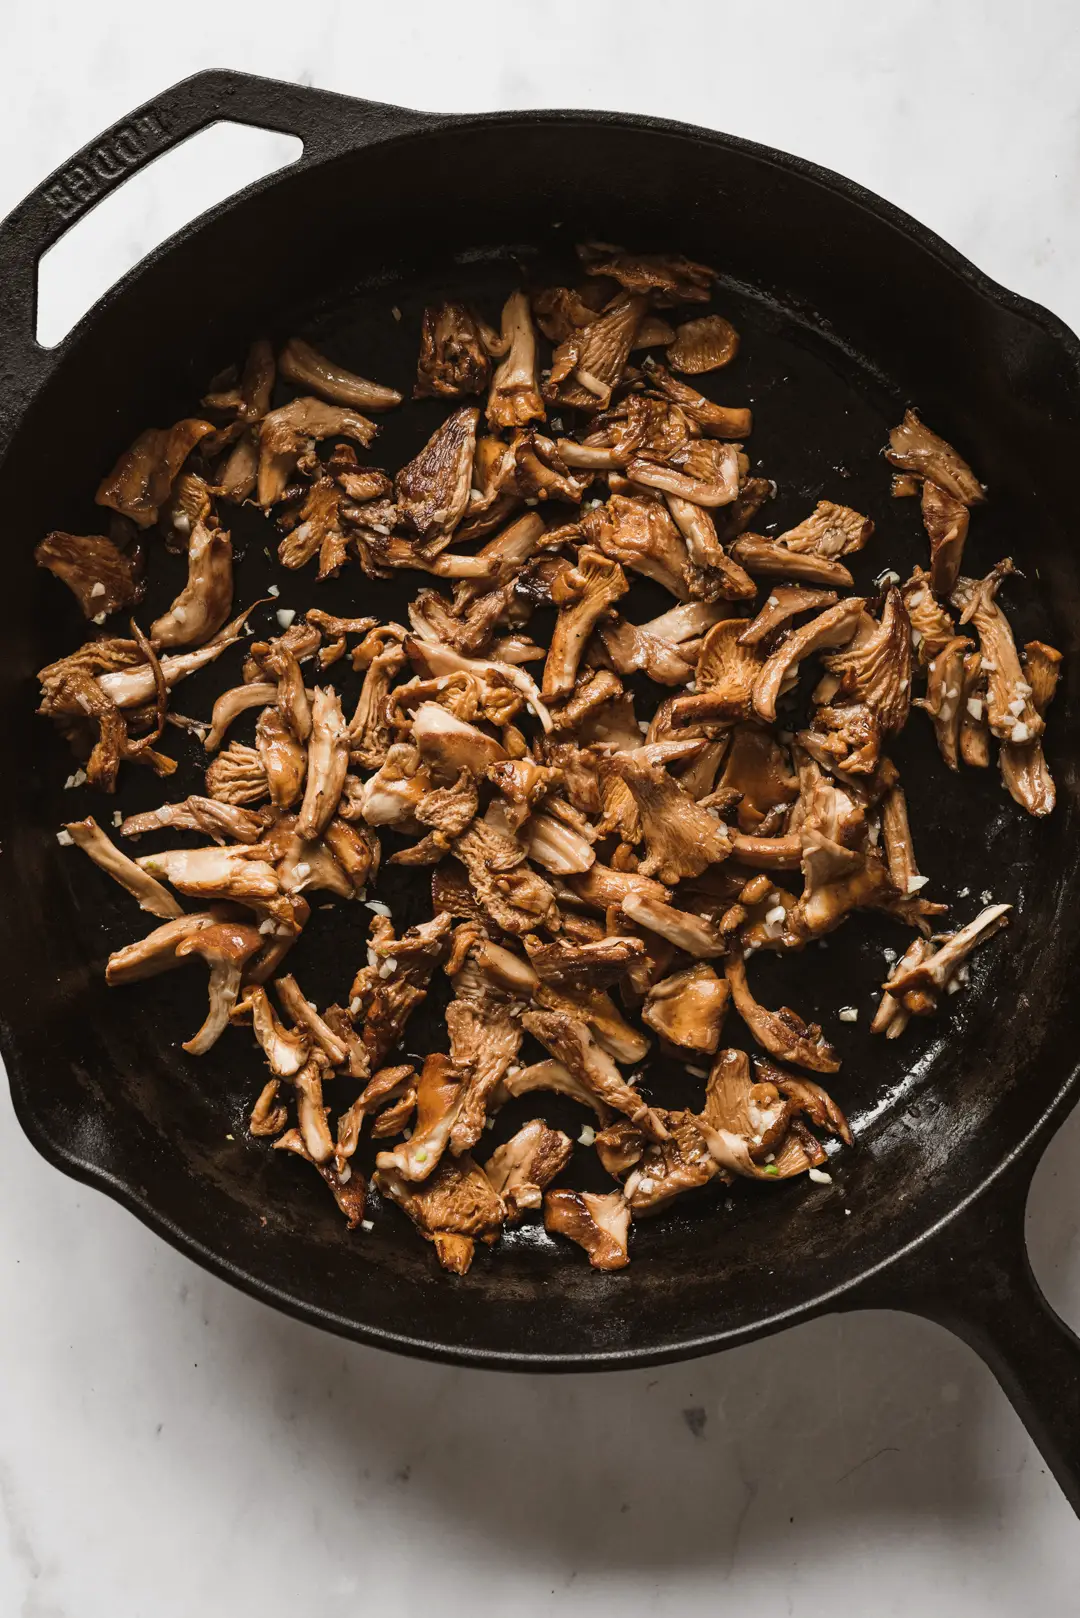 Cooked chanterelle mushrooms